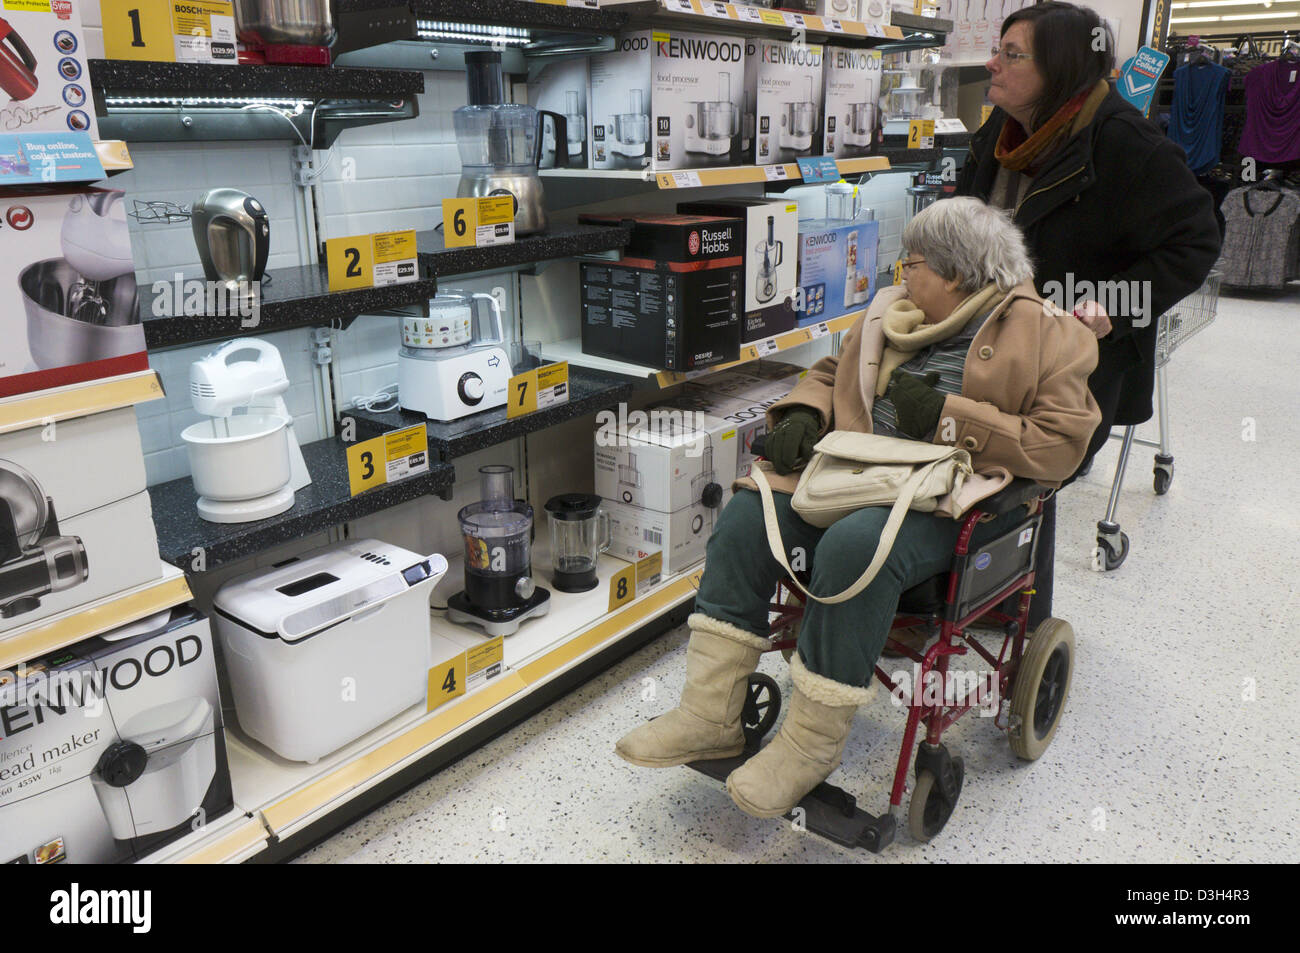 An elderly lady in a wheelchair and her carer or assistant look at kitchenware electrical products in a supermarket. Stock Photo